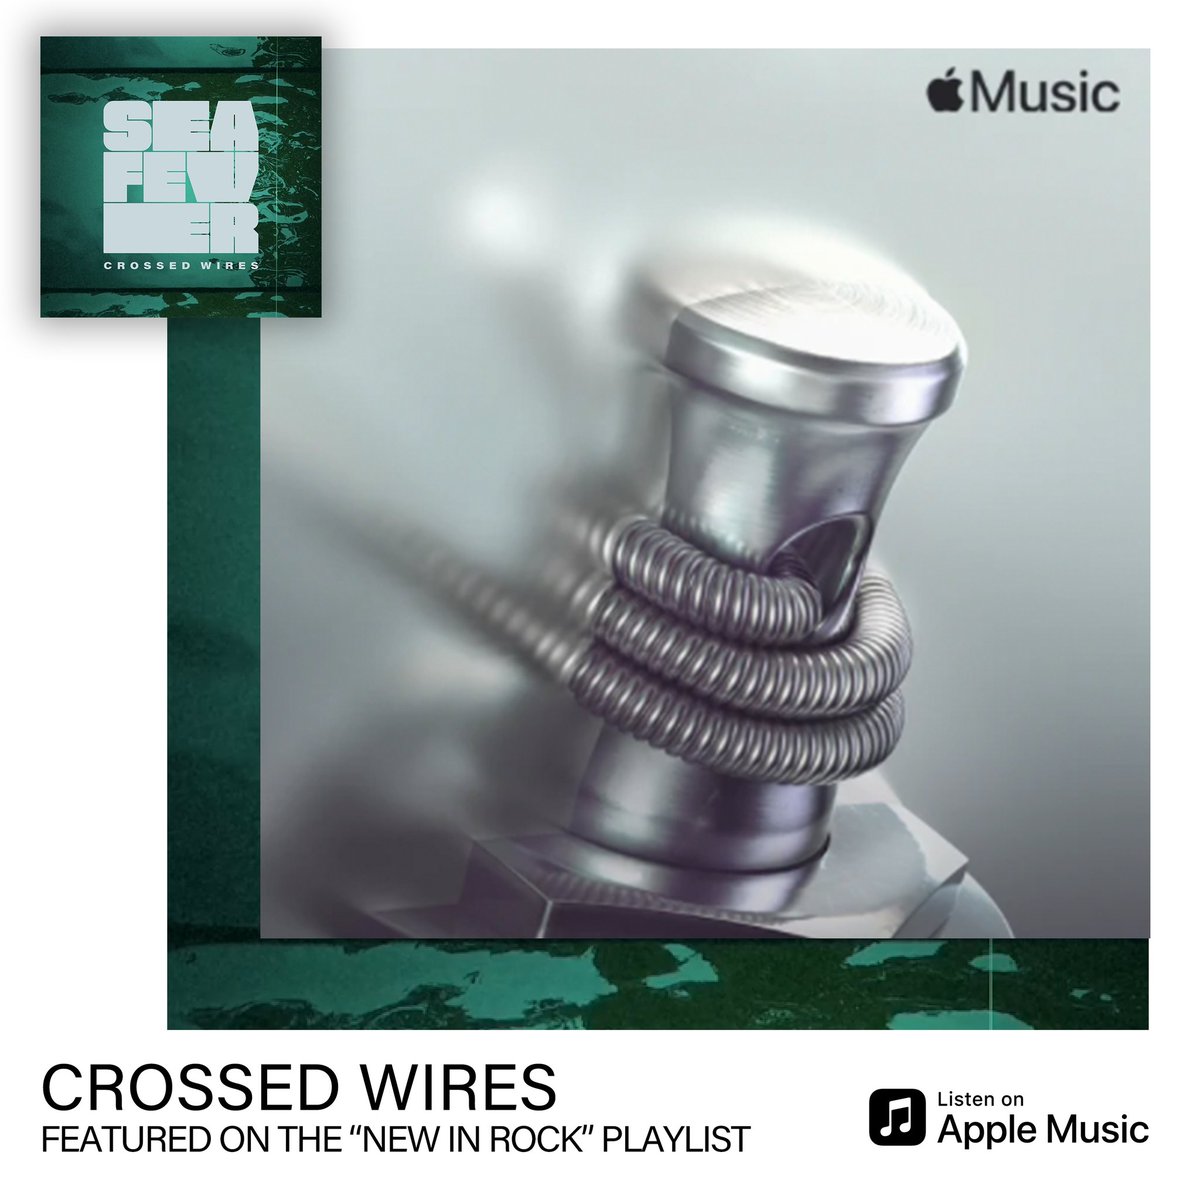 Thank you to @Spotify and @AppleMusic for featuring #CrossedWires on the #NewAlternative and #NewInRock playlists

Listen in via the link below 

seafever.lnk.to/crossedwires